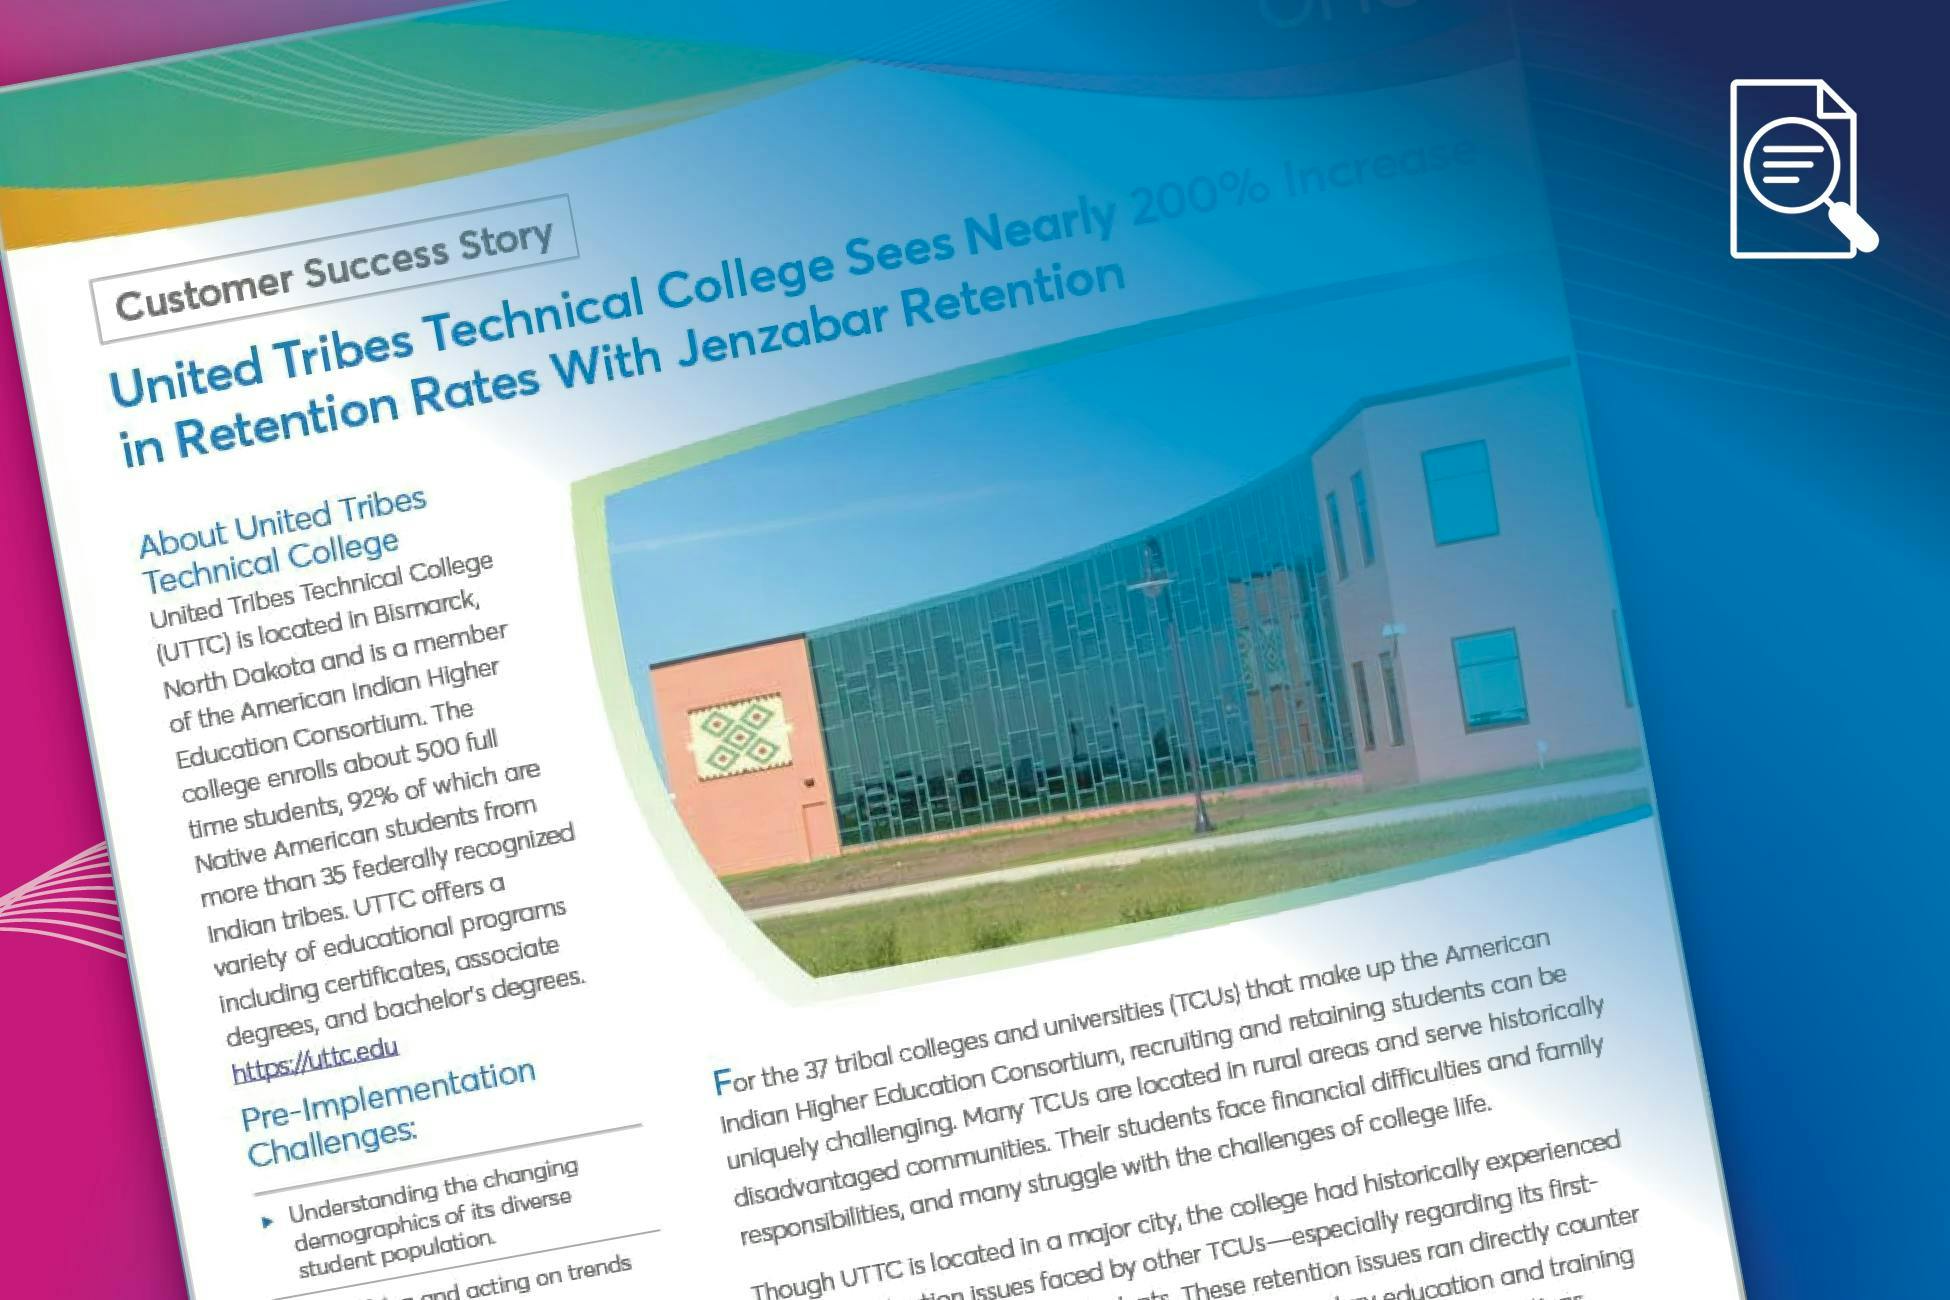 Case Study: United Tribes Technical College Sees Nearly 200% Increase in Retention Rates With Jenzabar Retention